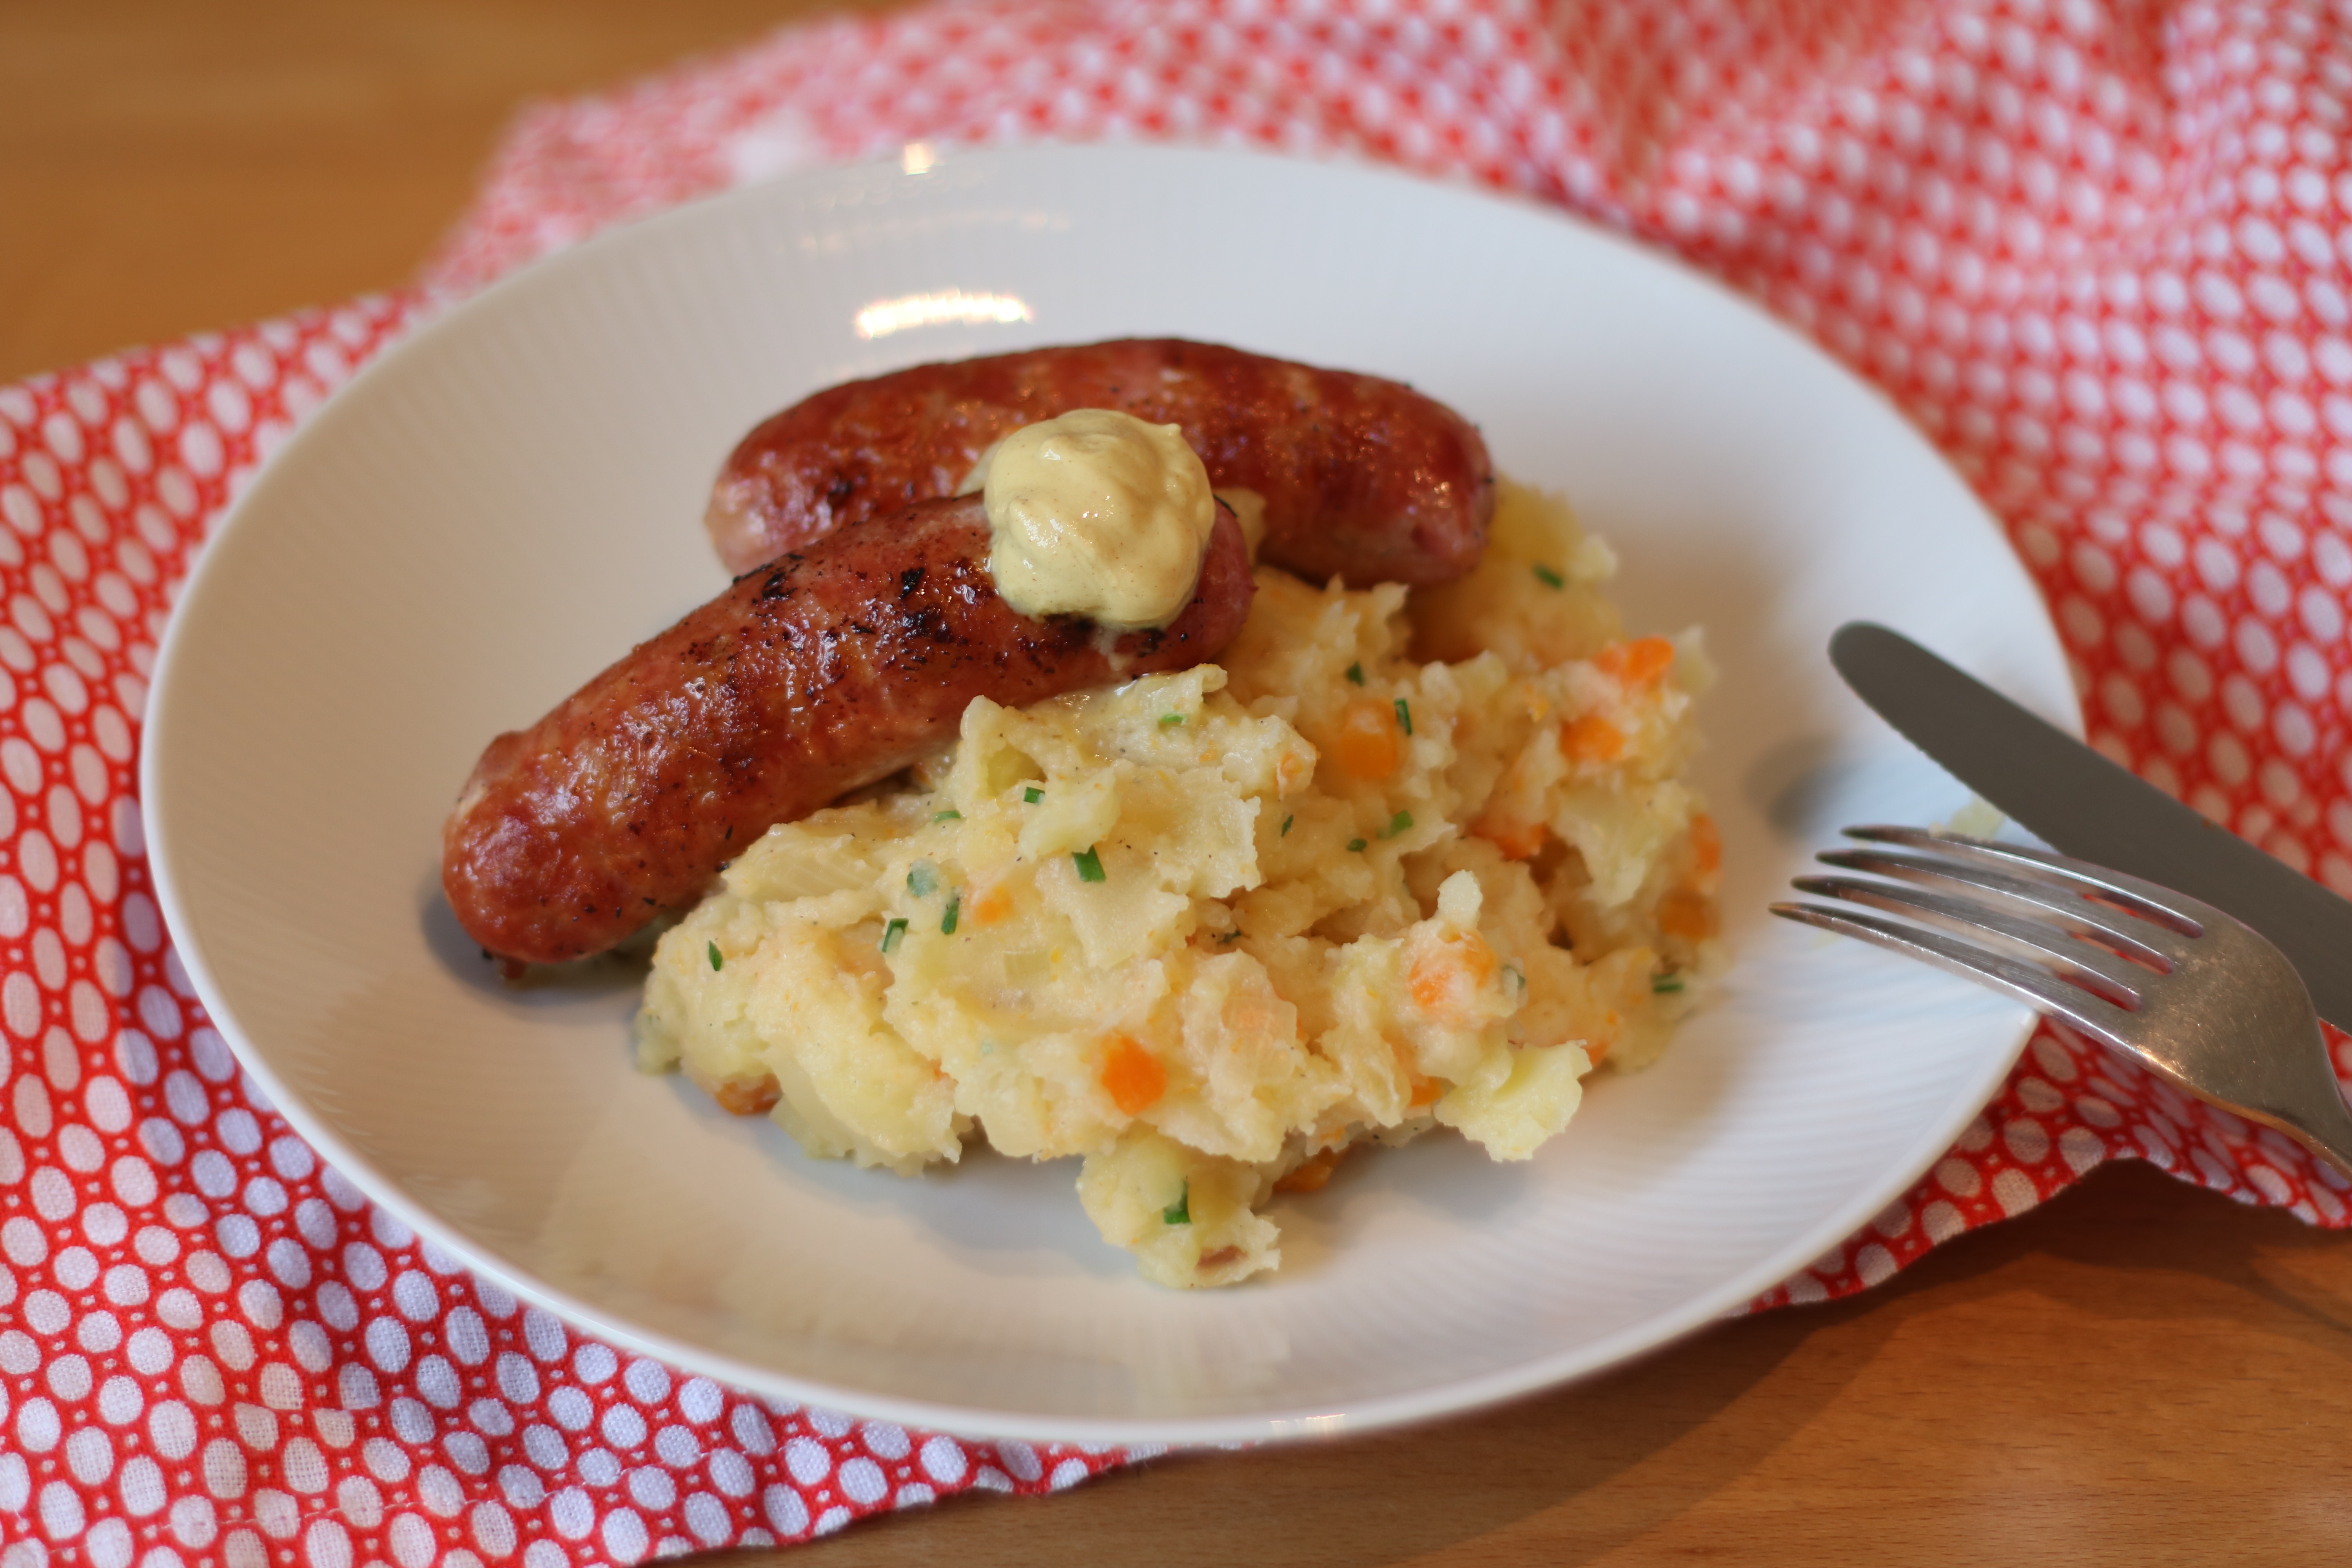 mashed potato and sausages served on white ceramic plate